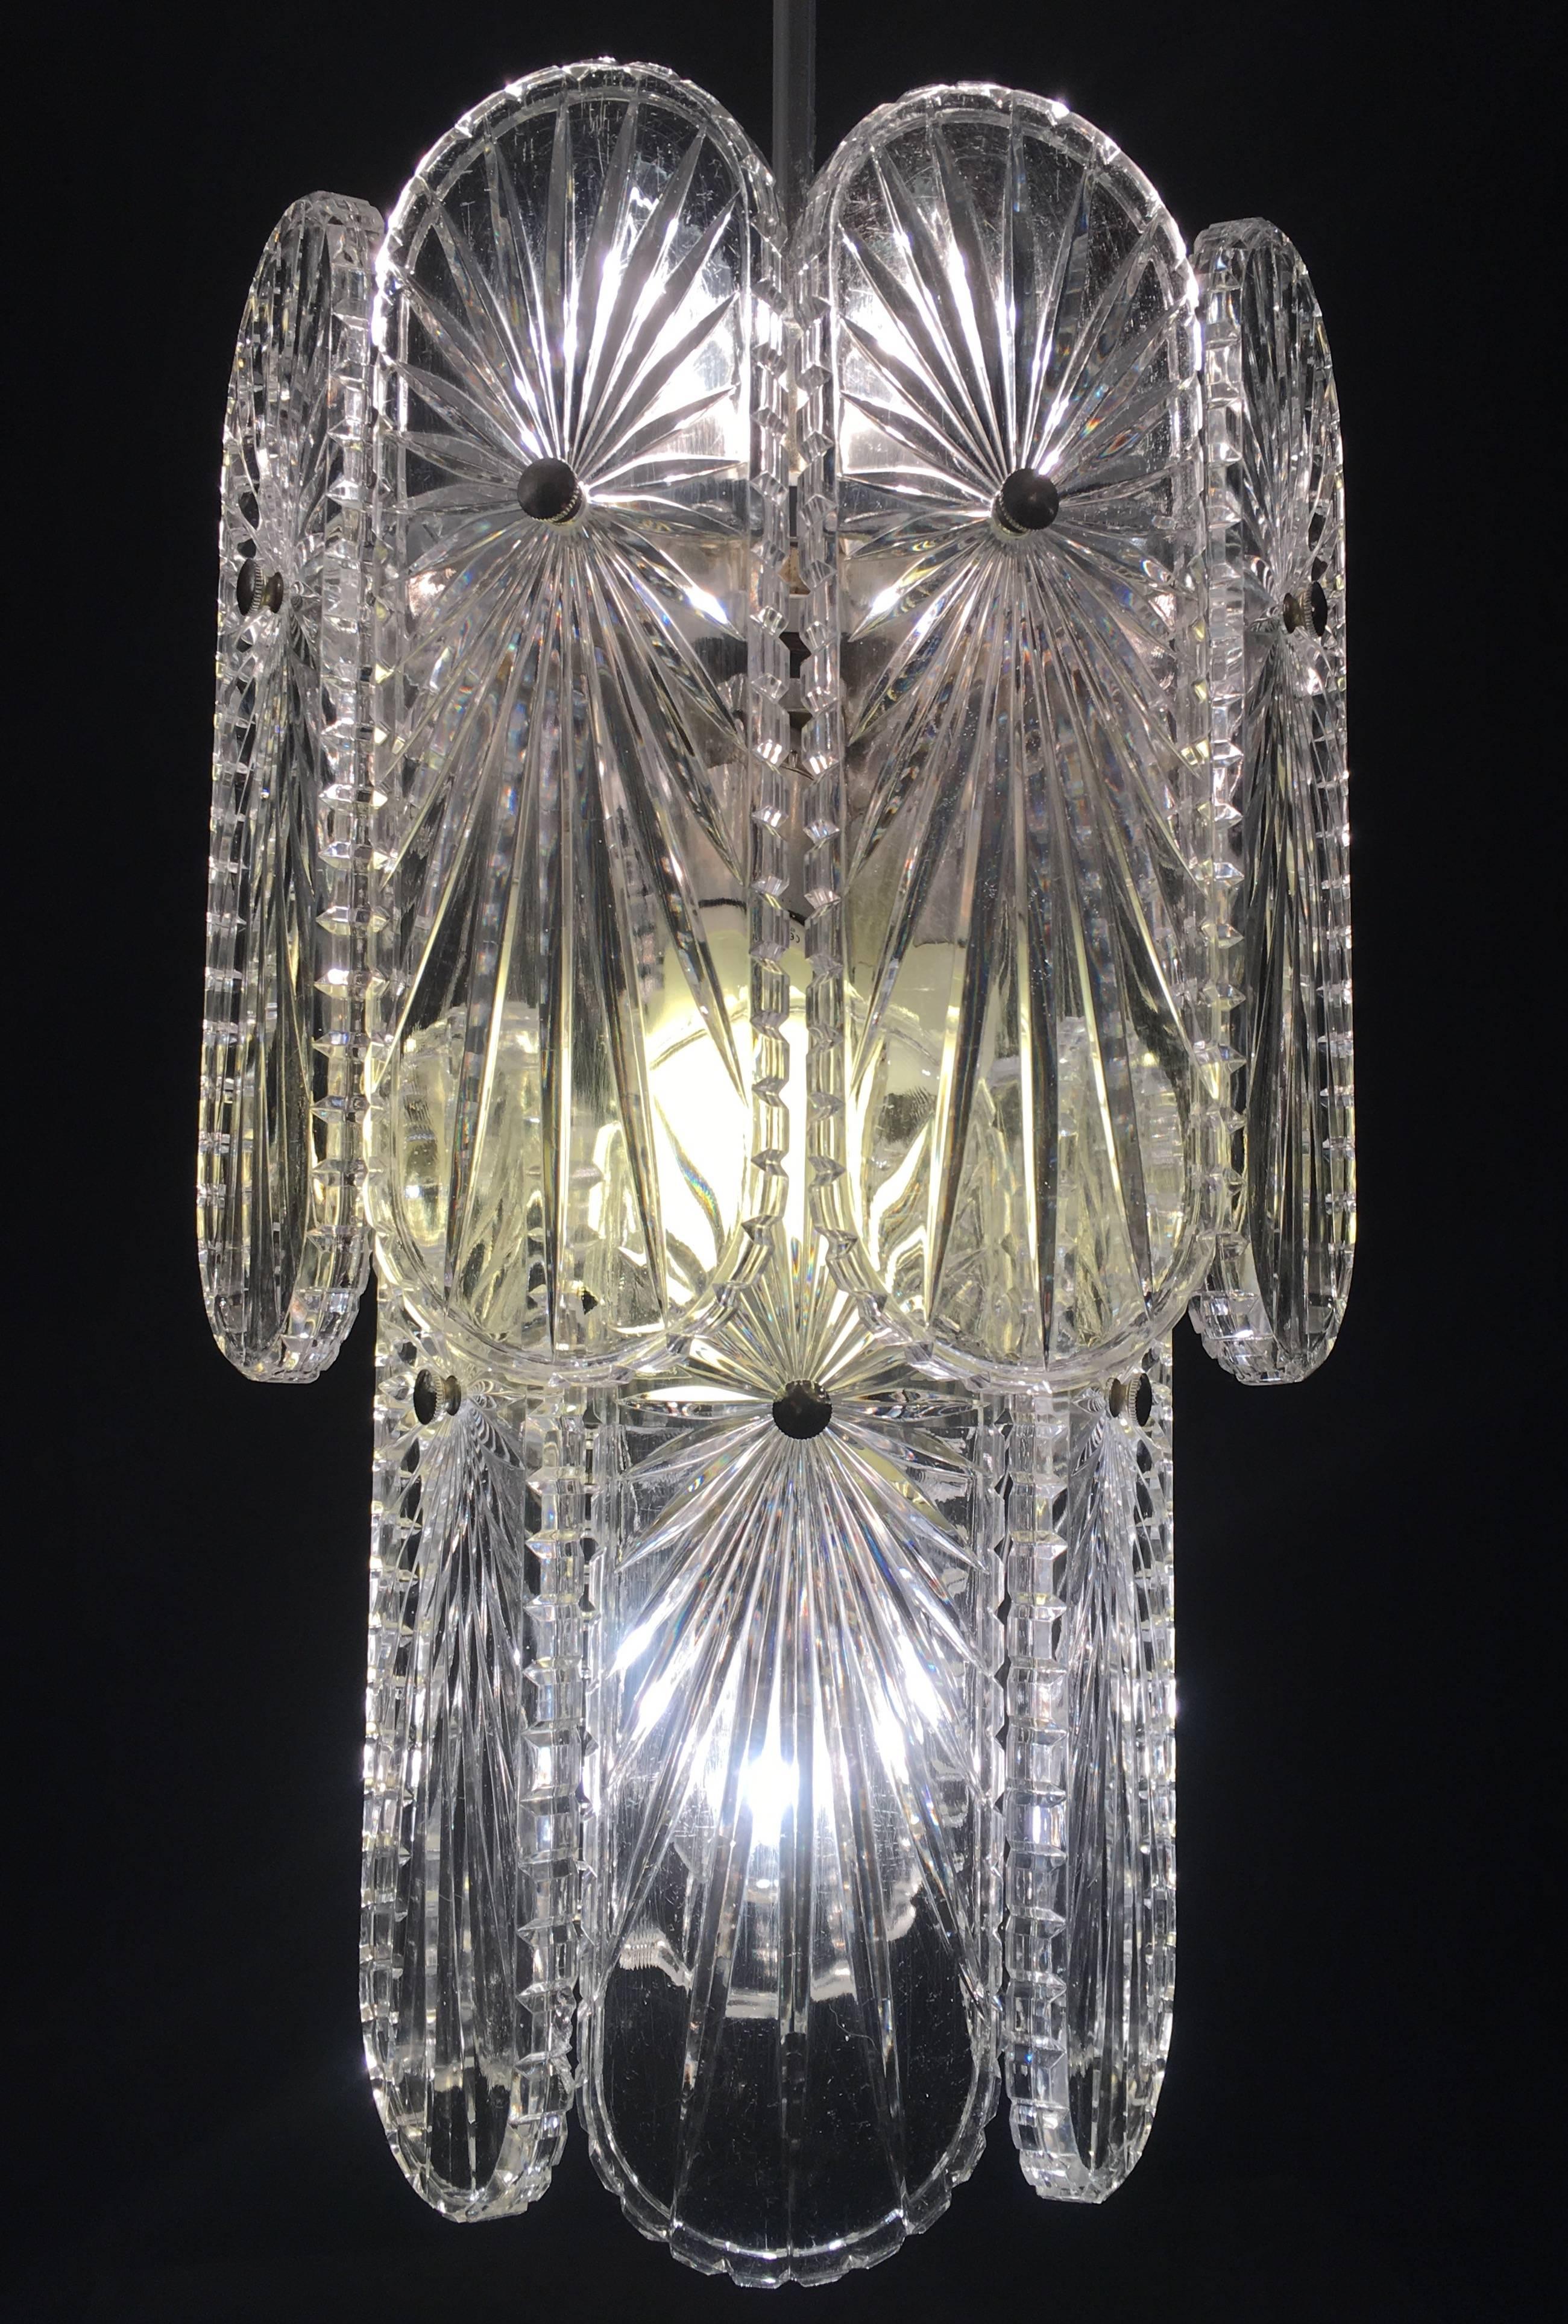 Chandelier with stylized glass elements on a brushed nickel frame.
  